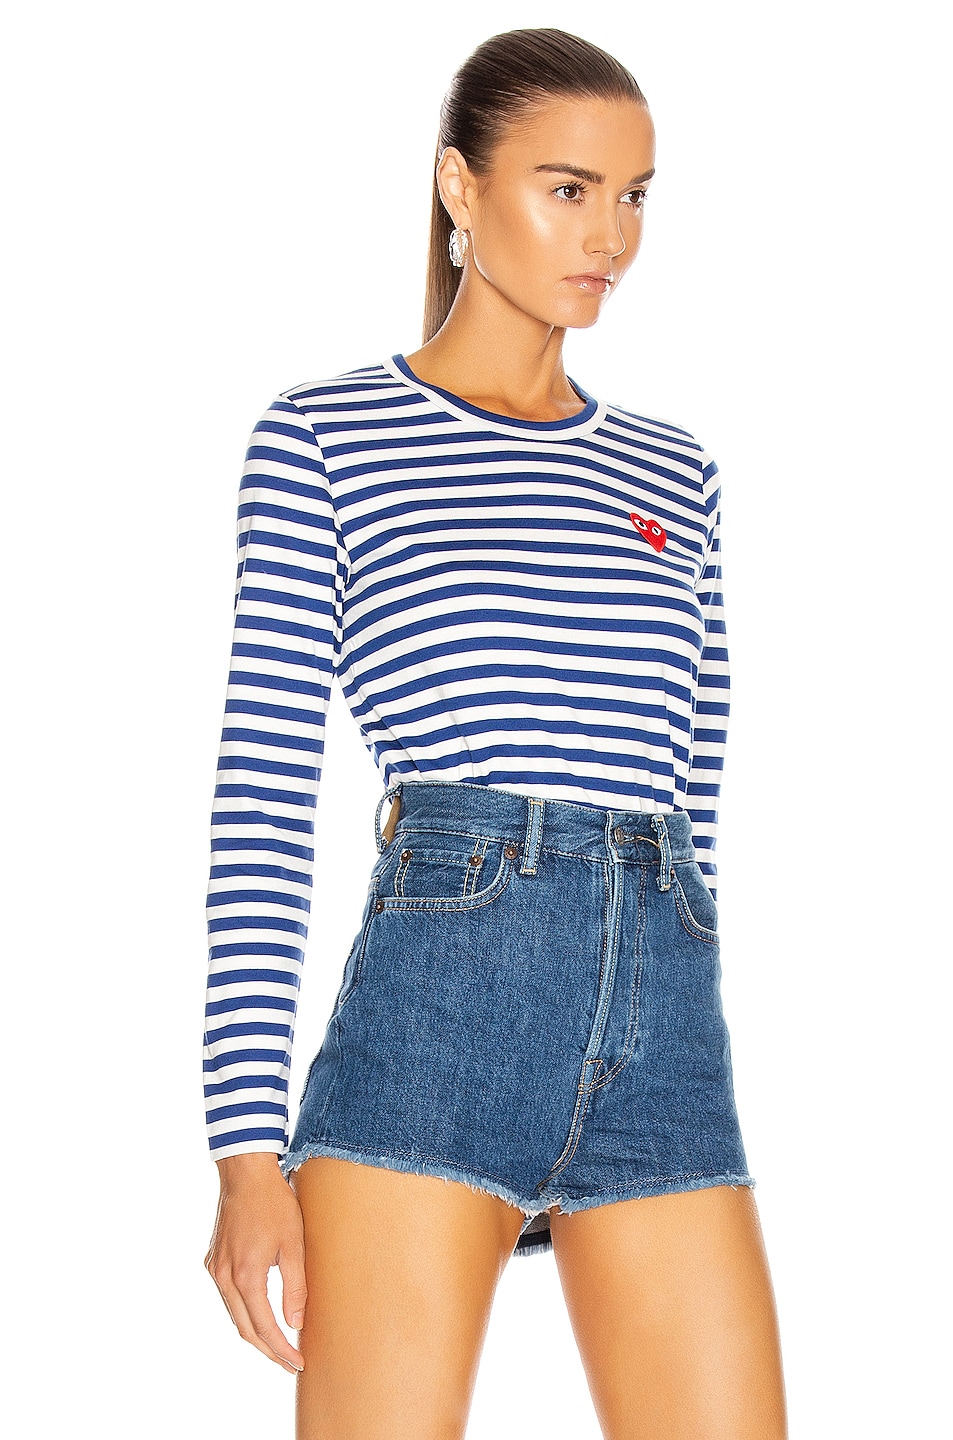 COMME des GARCONS PLAY Striped Cotton Red Heart Tee in Blue | FWRD